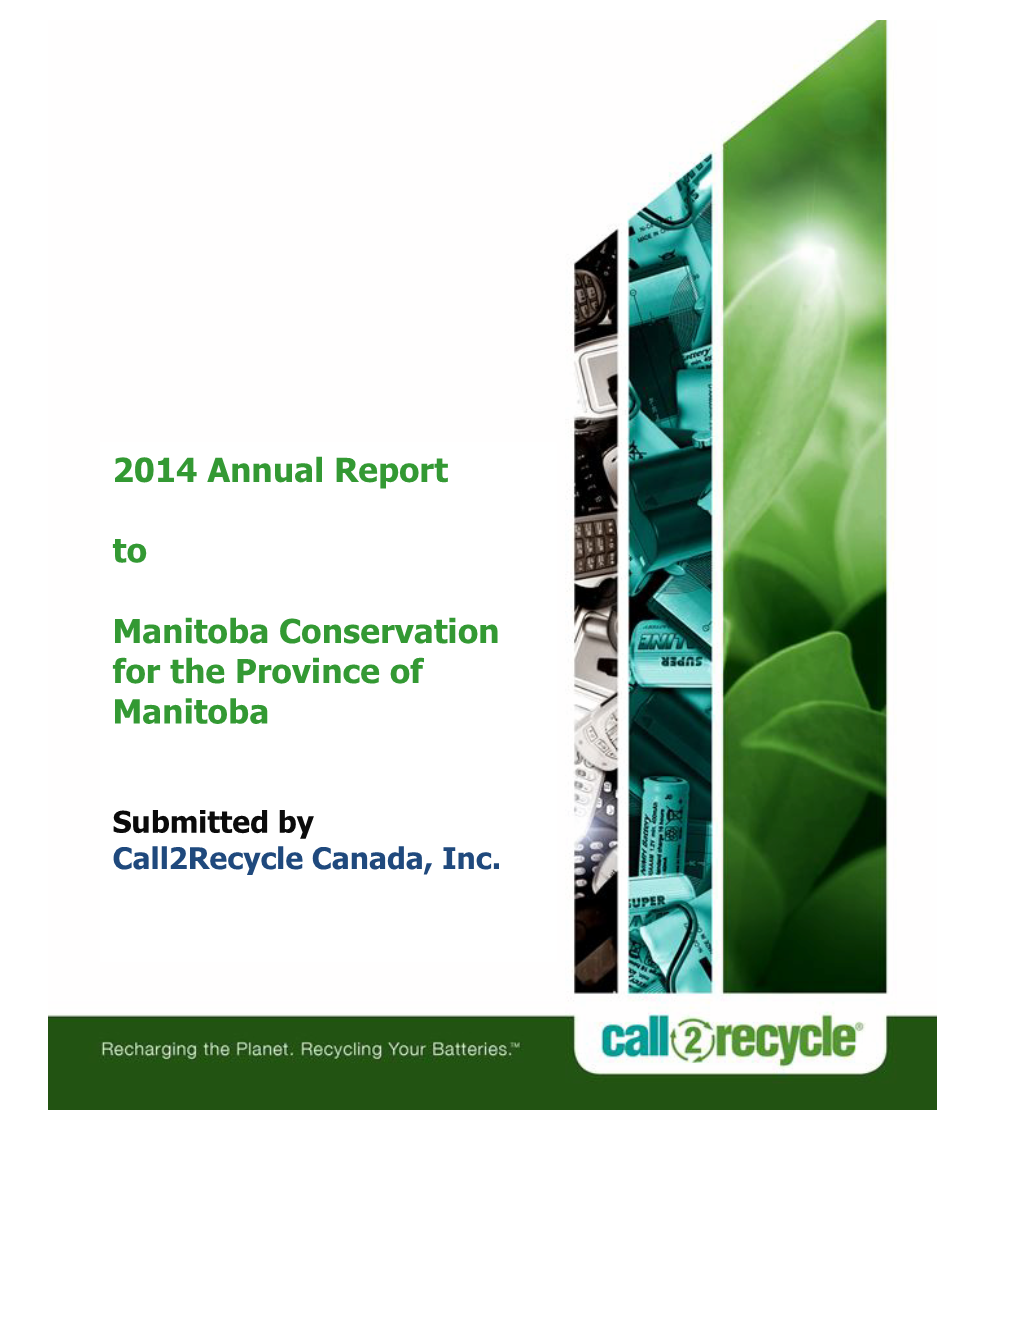 Call2recycle Canada, Inc